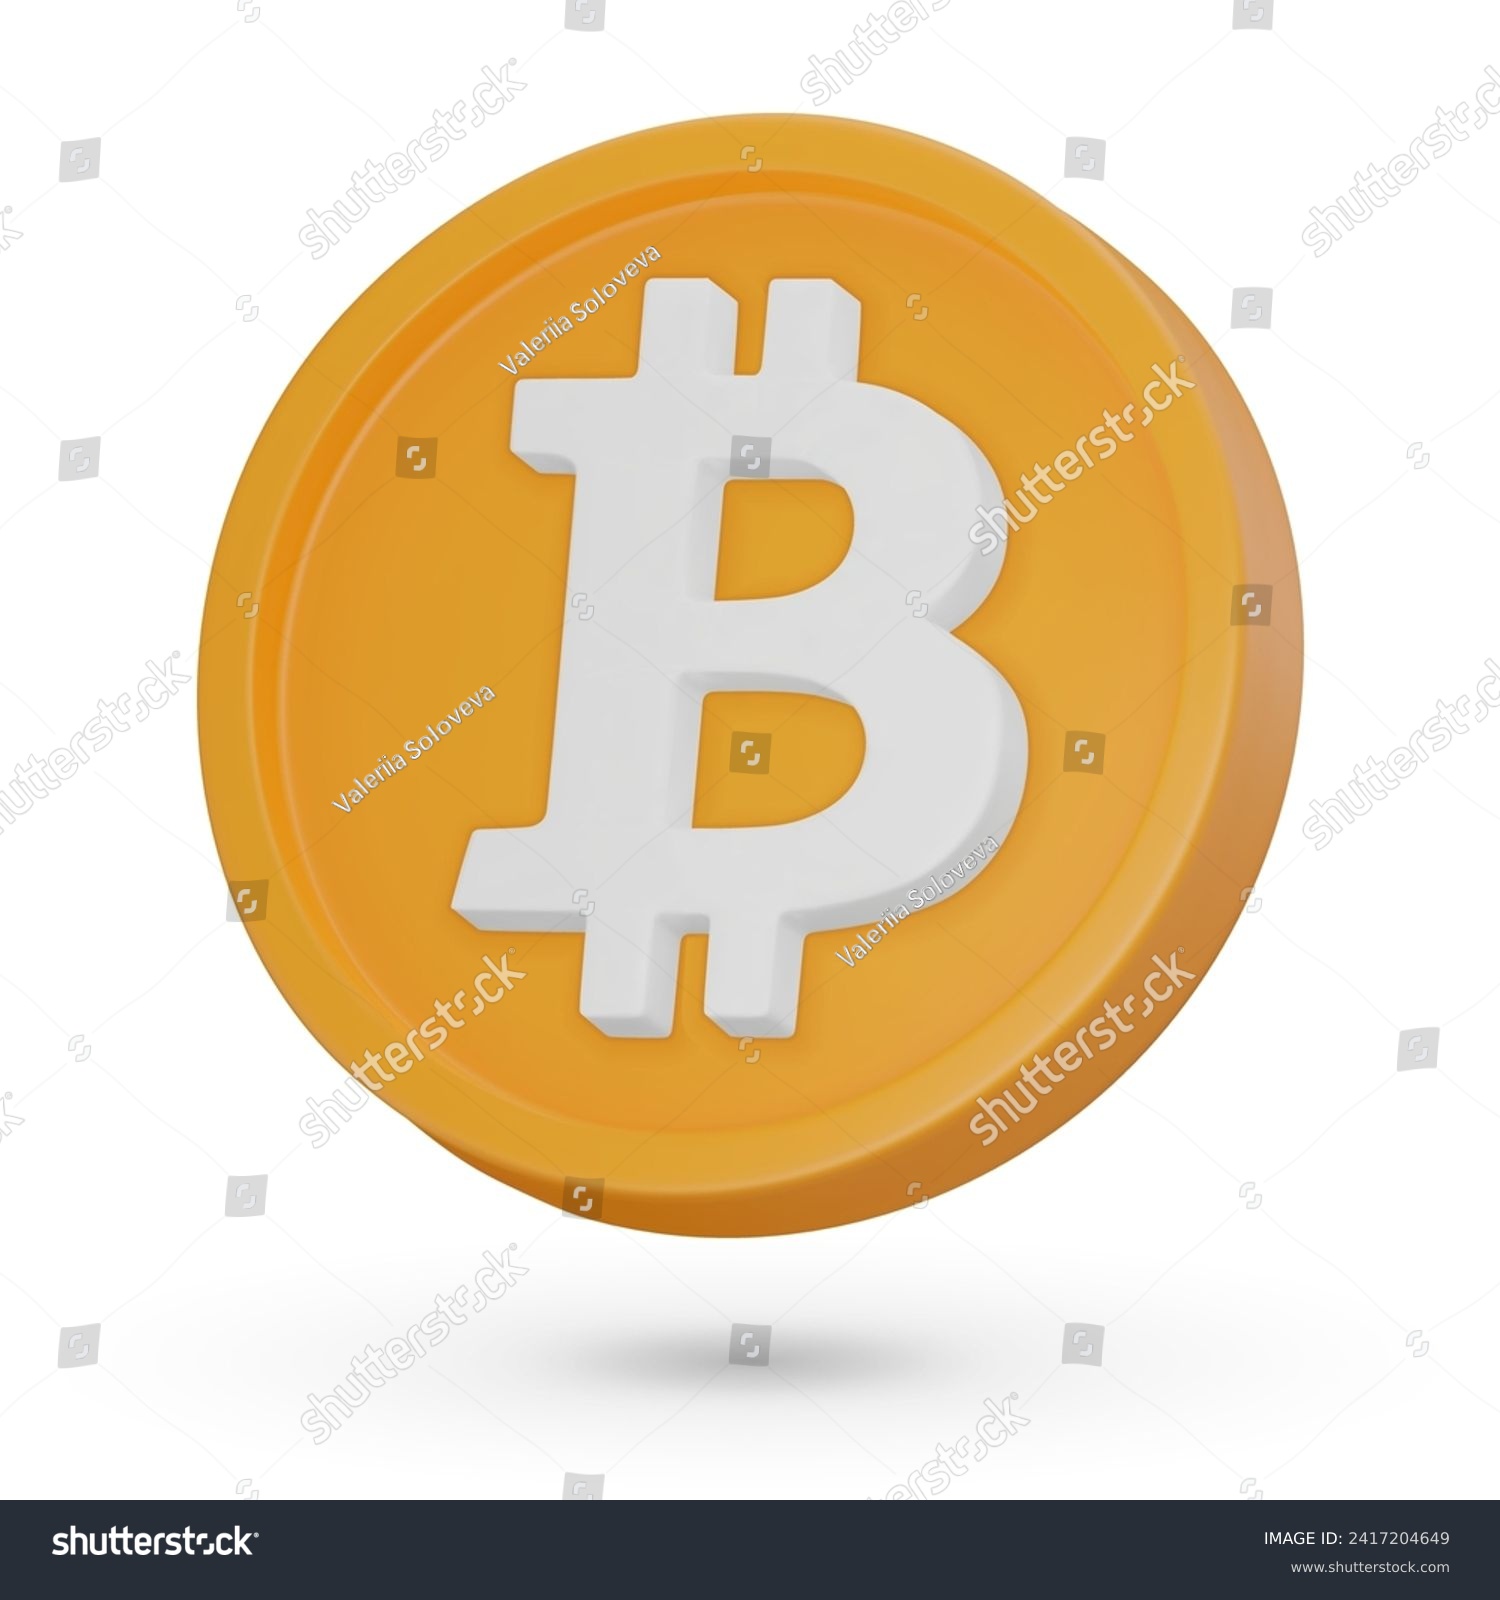 SVG of 3D coin. Cryptocurrency symbol Bitcoin BTC. 3D Vector icon. Illustration isolated on a white background svg